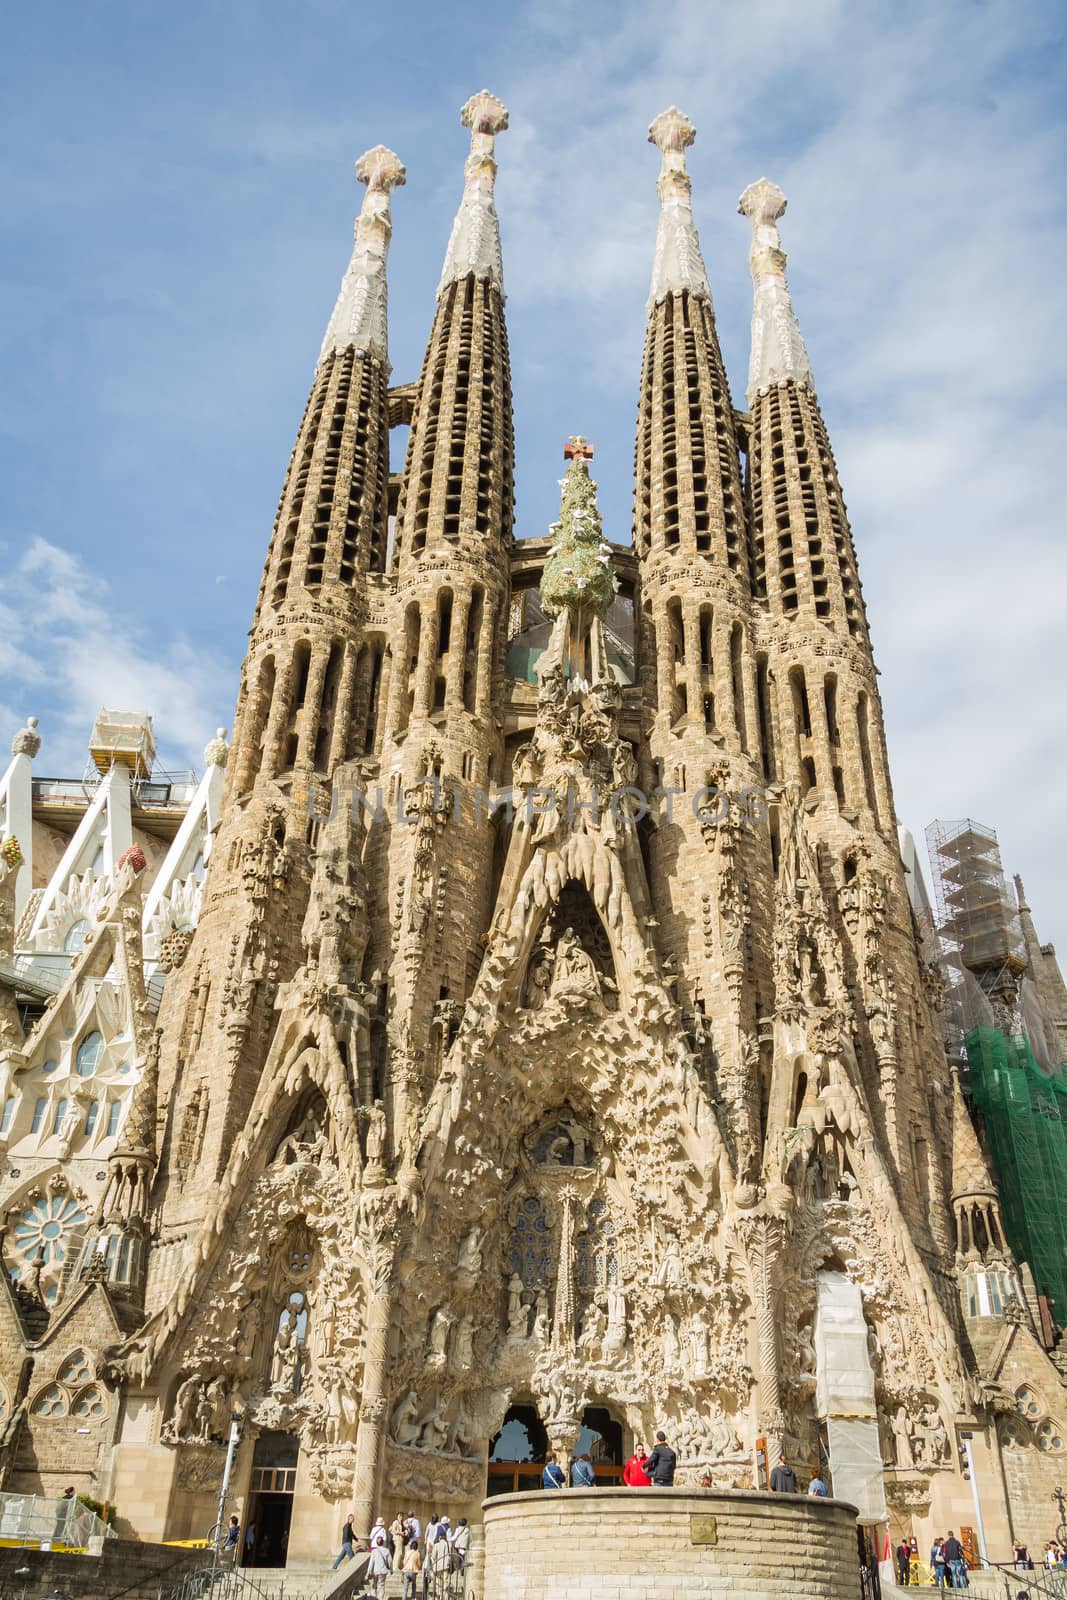 View of the Sagrada Familia cathedral, designed by Antoni Gaudi, by doble.d